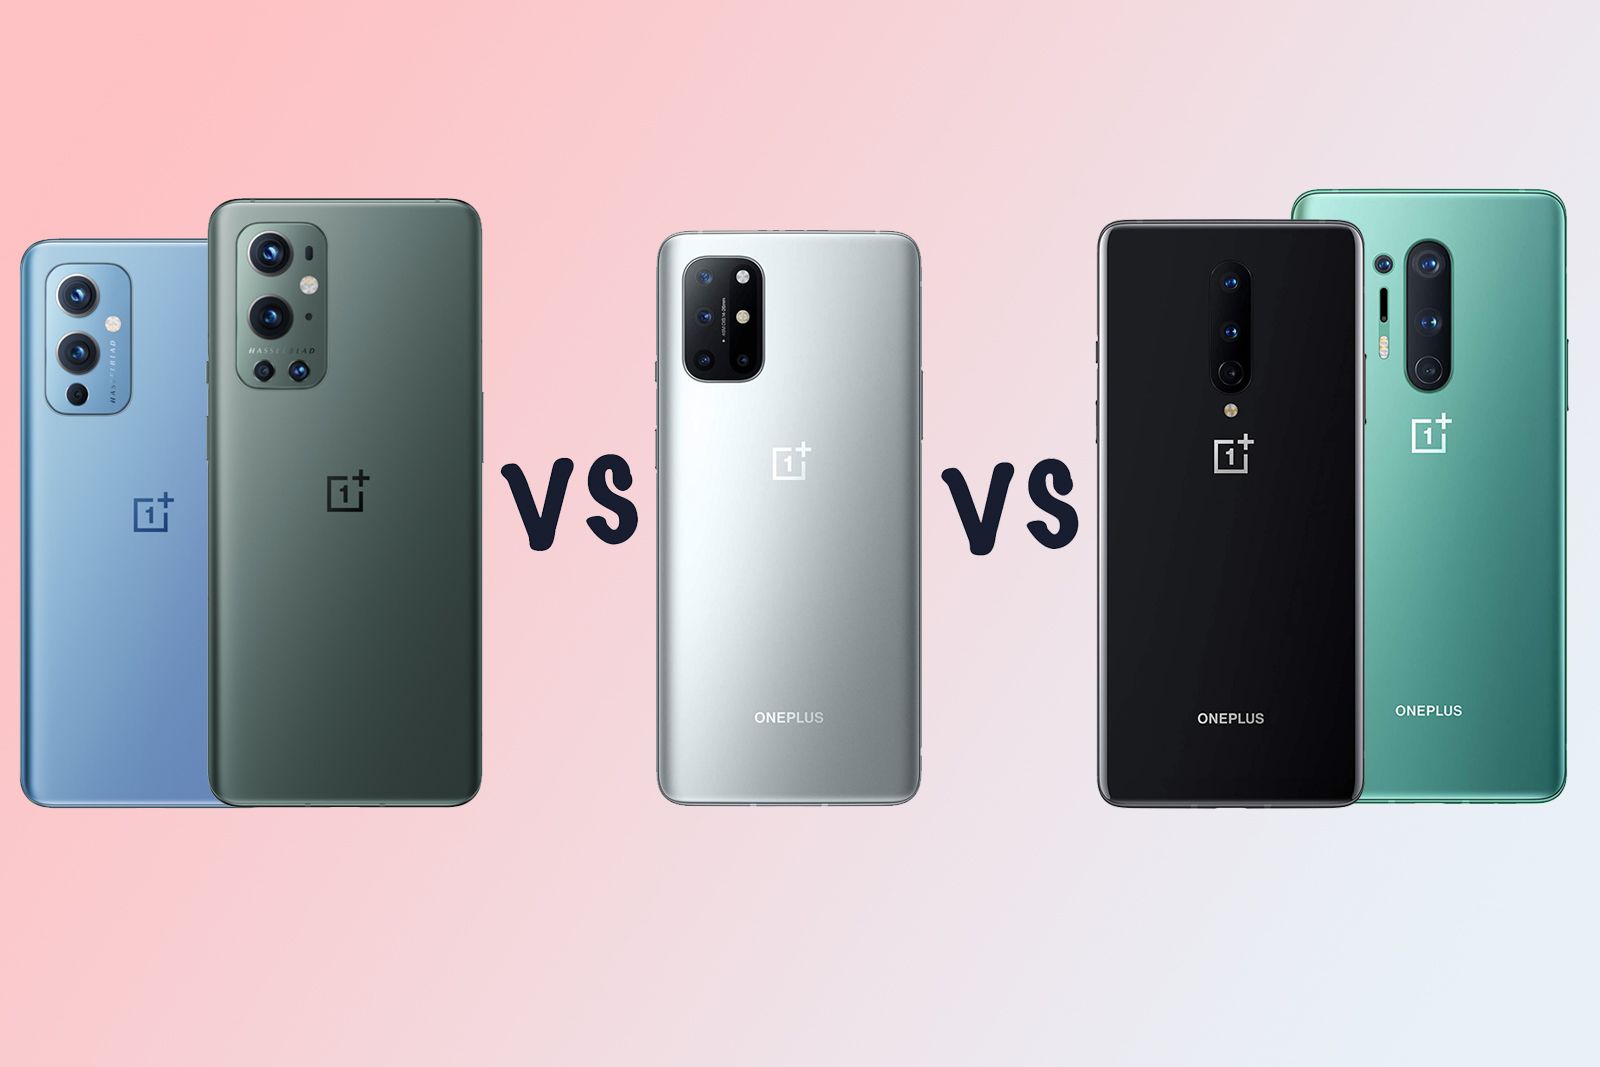 OnePlus 9 vs OnePlus 8T vs OnePlus 8: Which should you buy? photo 1